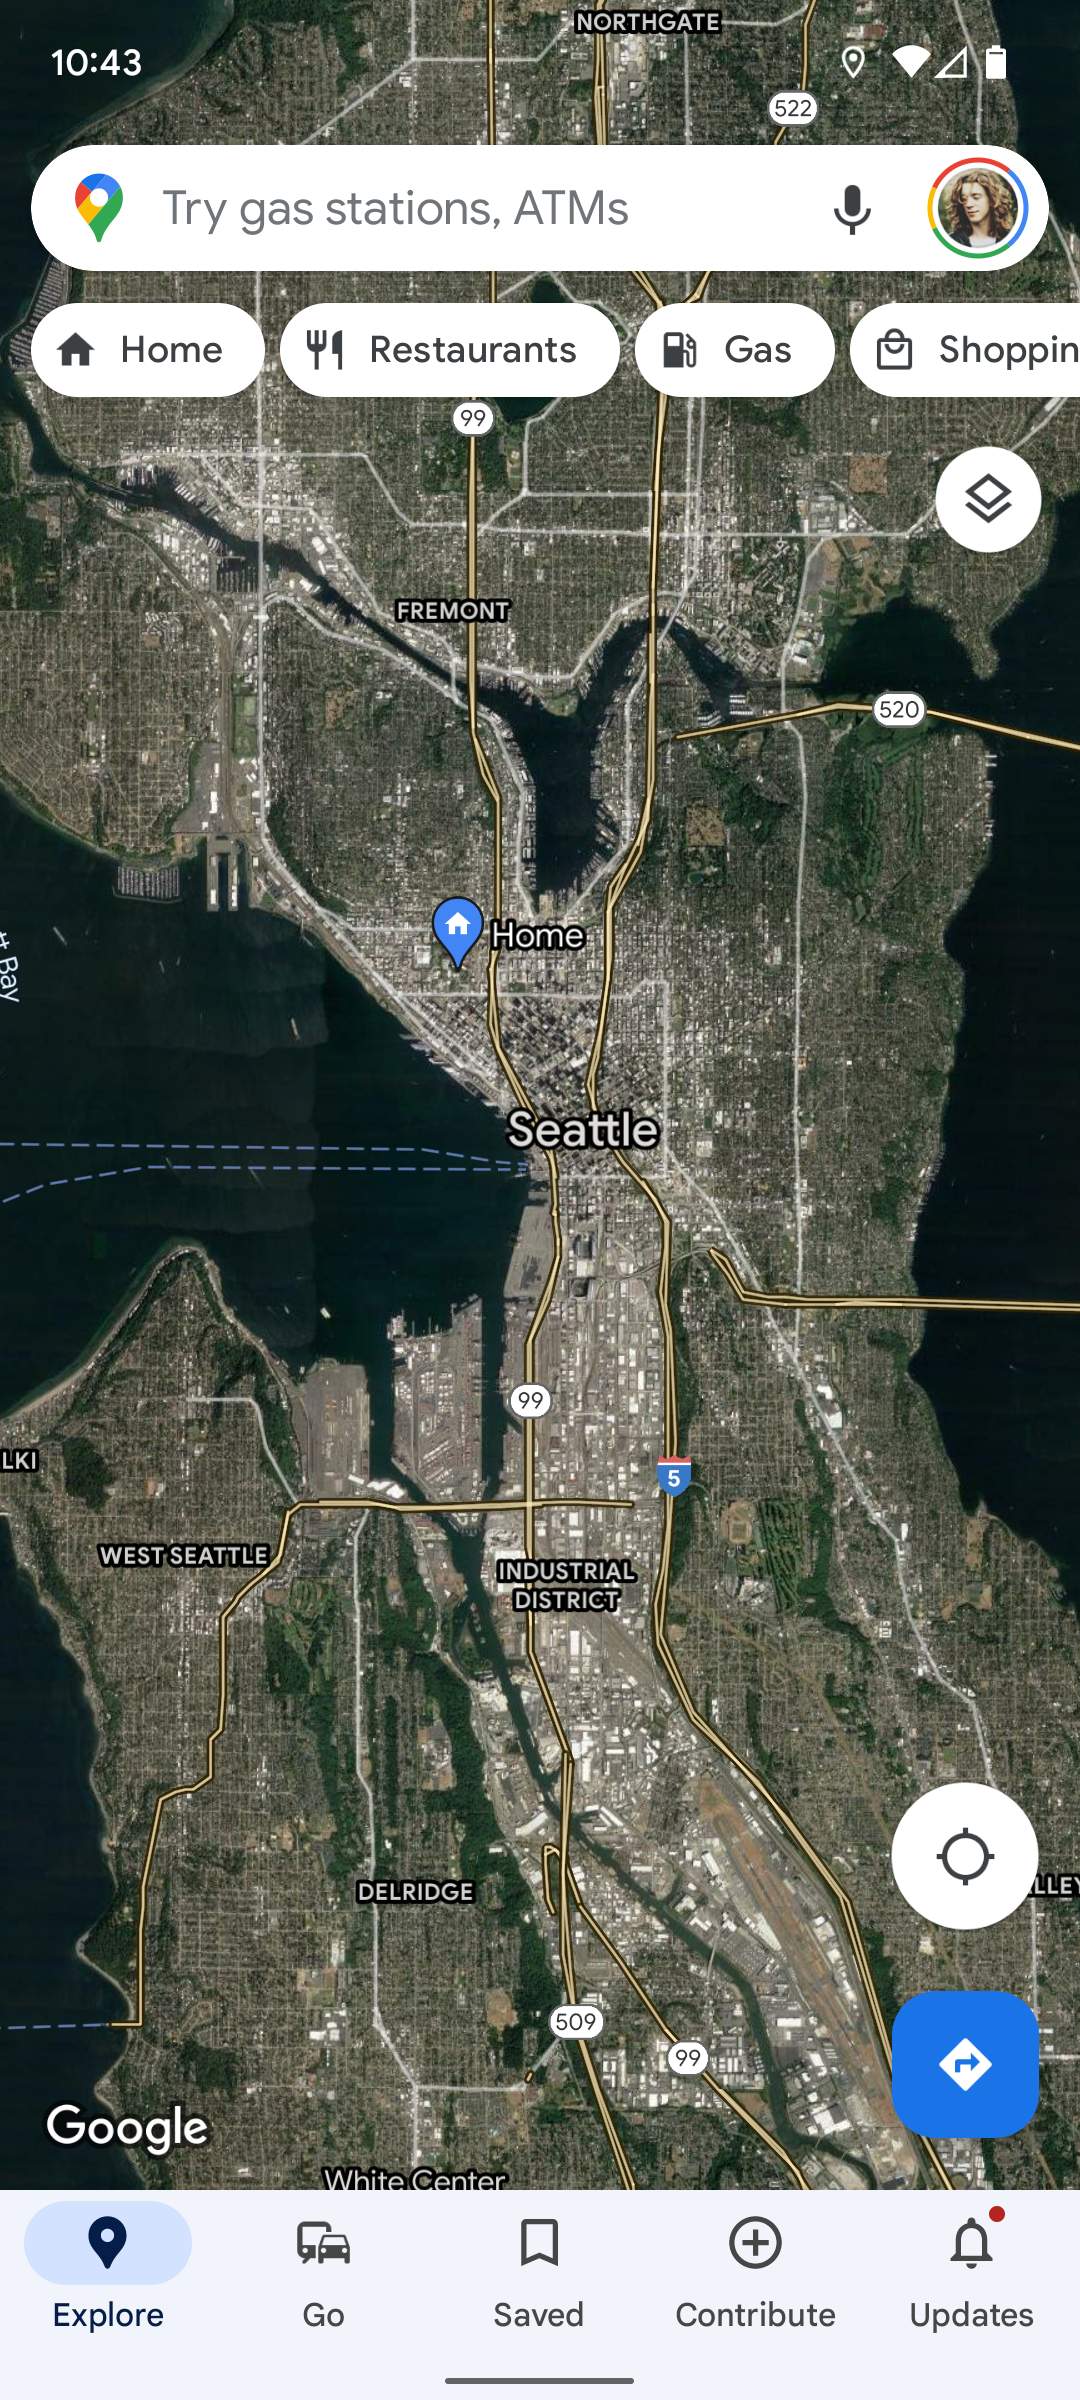 The Google Maps home screen showing Seattle in sattelite view.